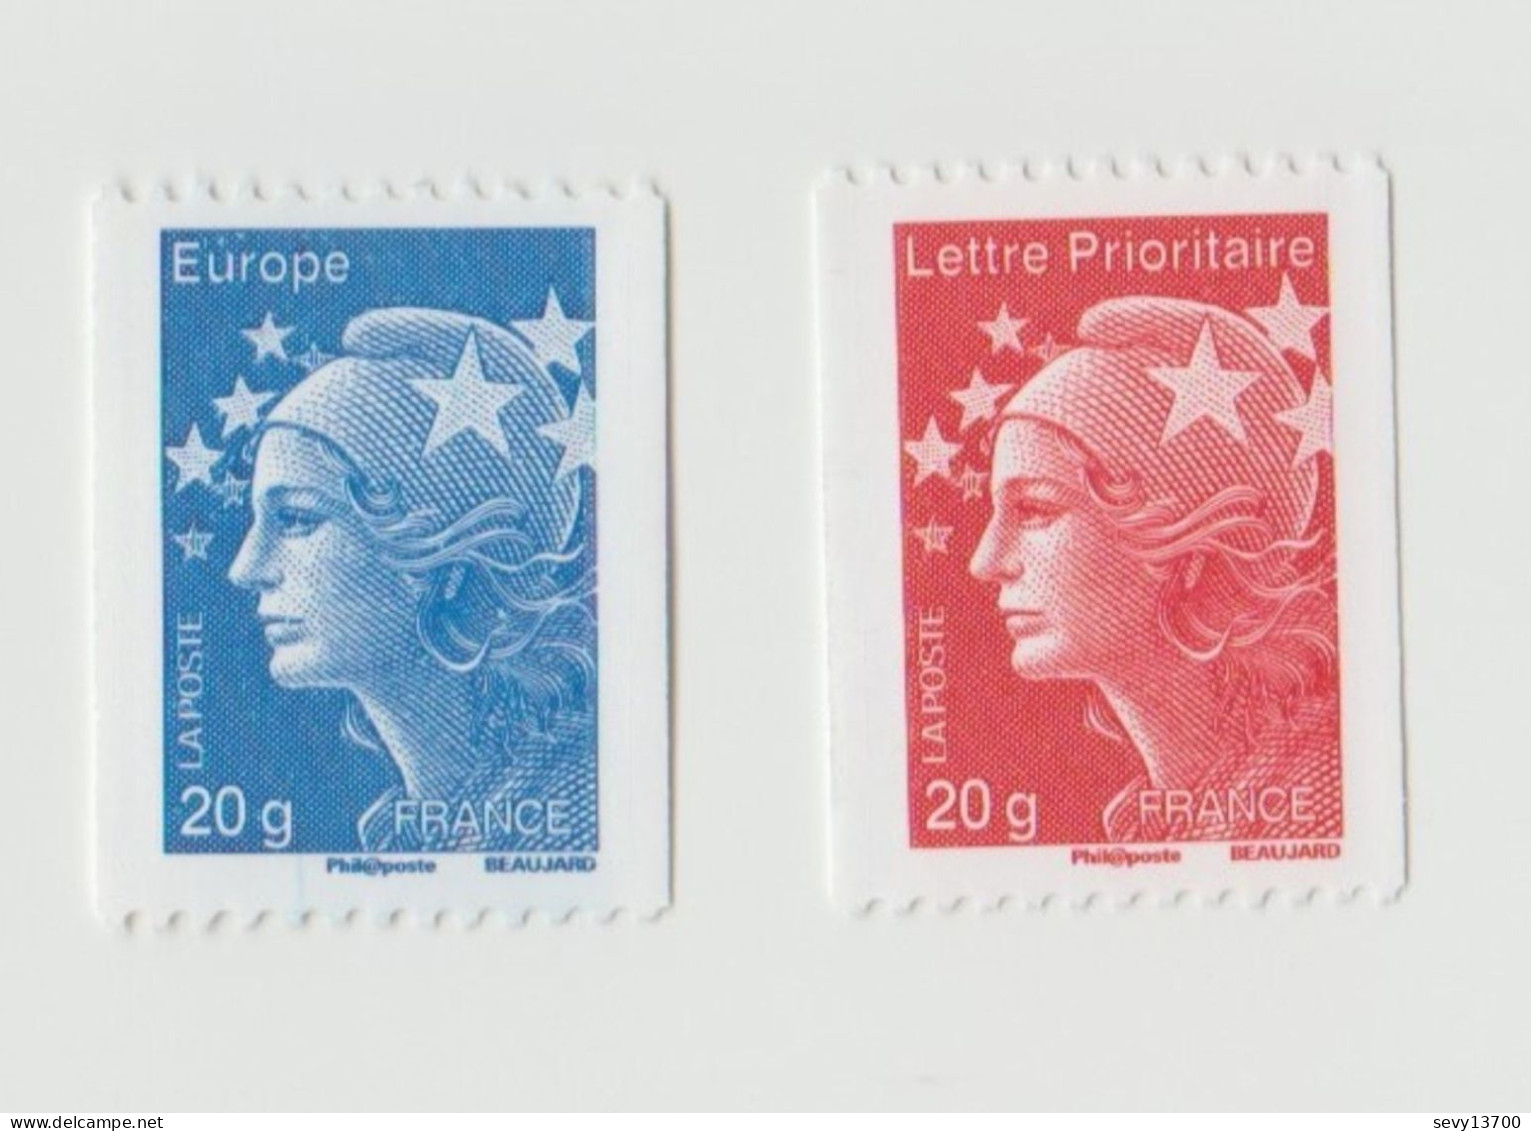 France Année 2009 - 2 Timbres Roulette Marianne De Beaujard Neuf Yvert Tellier 4573 Et 4572 - 2008-2013 Marianna Di Beaujard